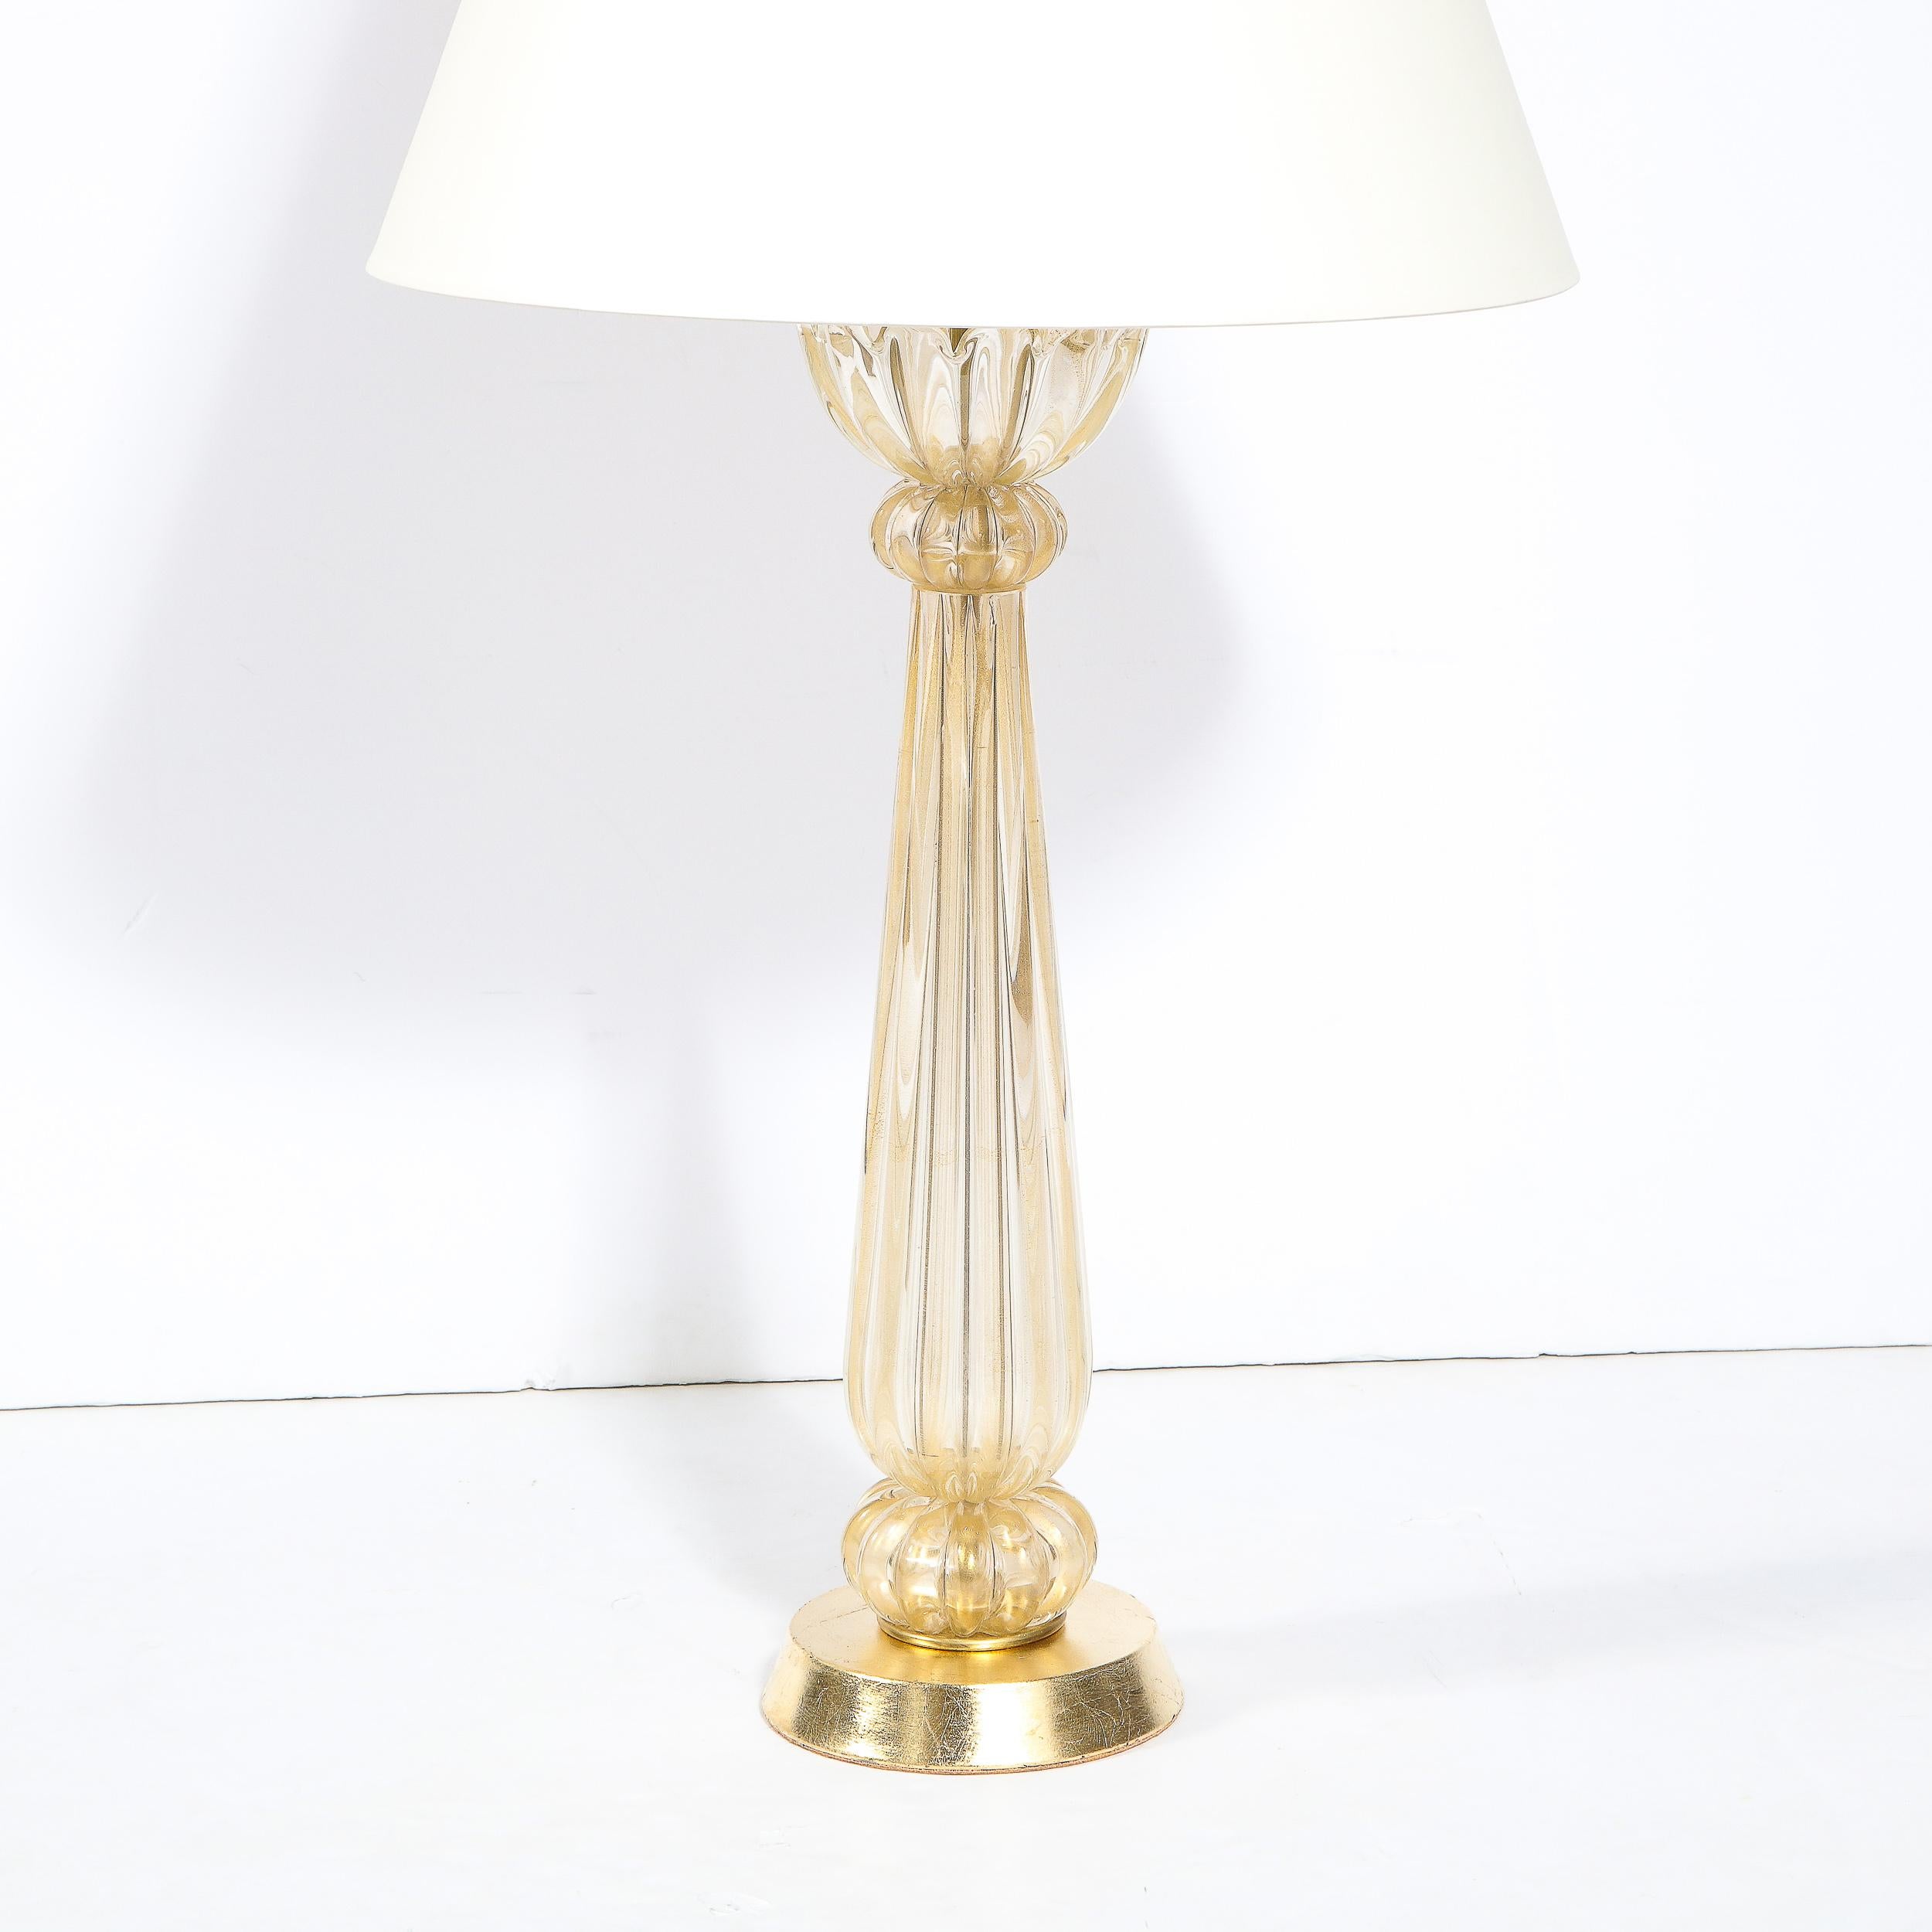 Mid-20th Century Mid-Century Modern Hand Blown Murano Glass Table Lamp with 24kt Gold Flecks For Sale